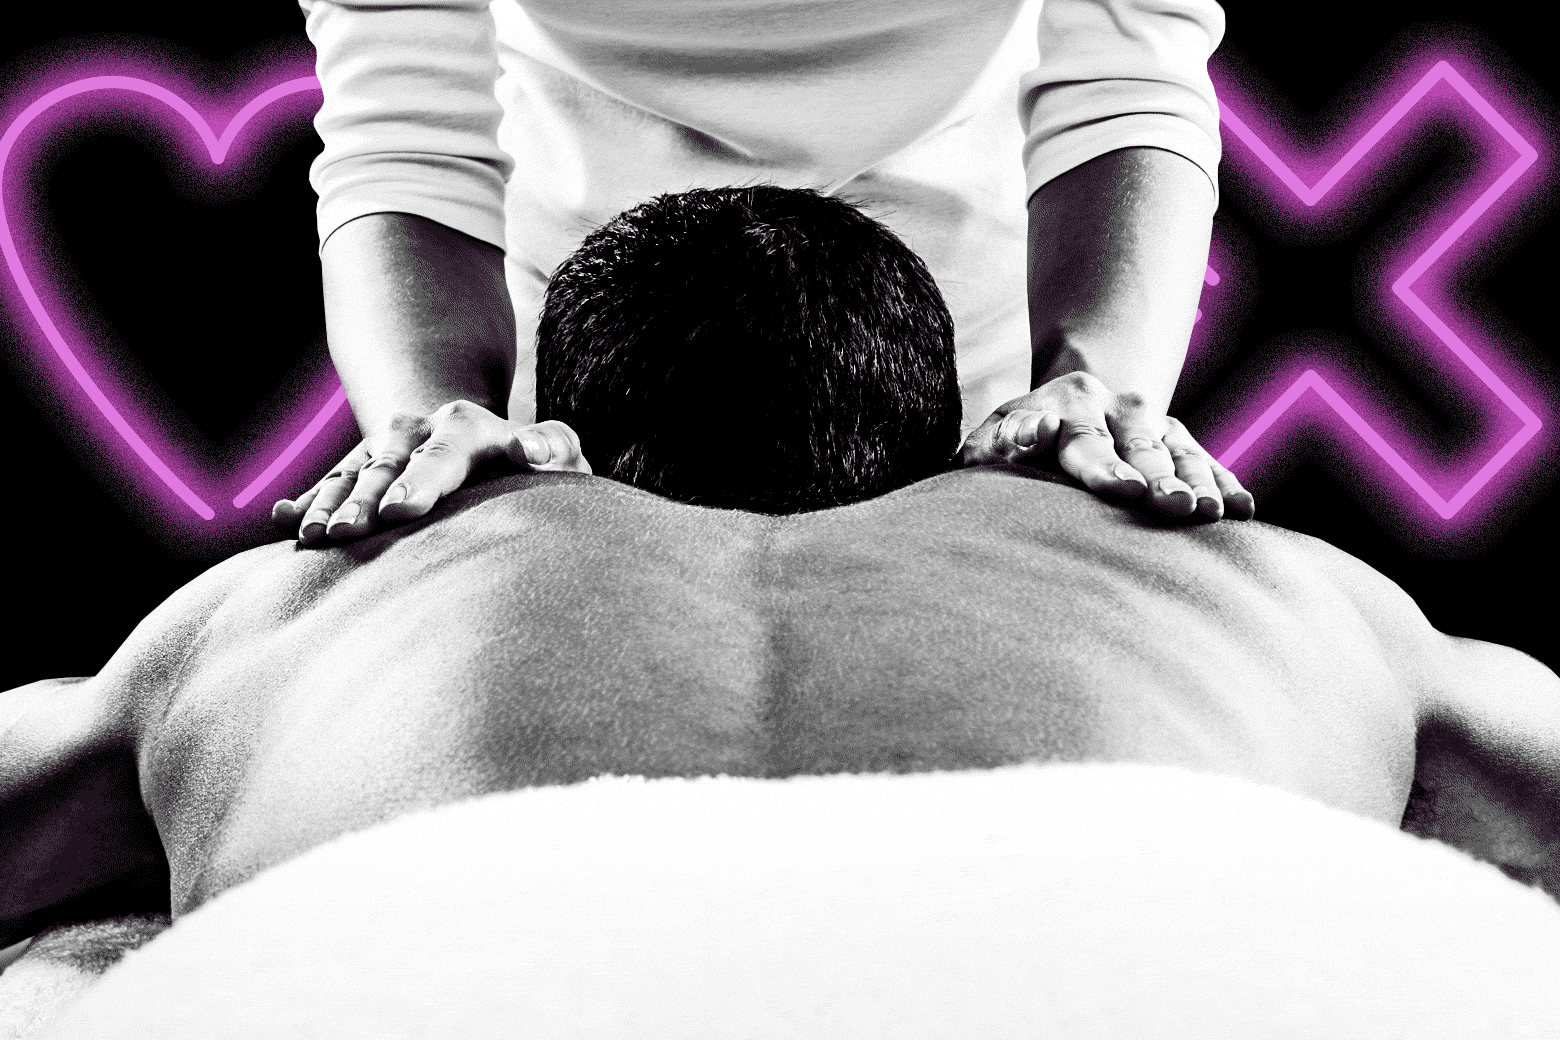 780px x 520px - My wife shut down our sex lifeâ€”is it wrong I go to massage ...